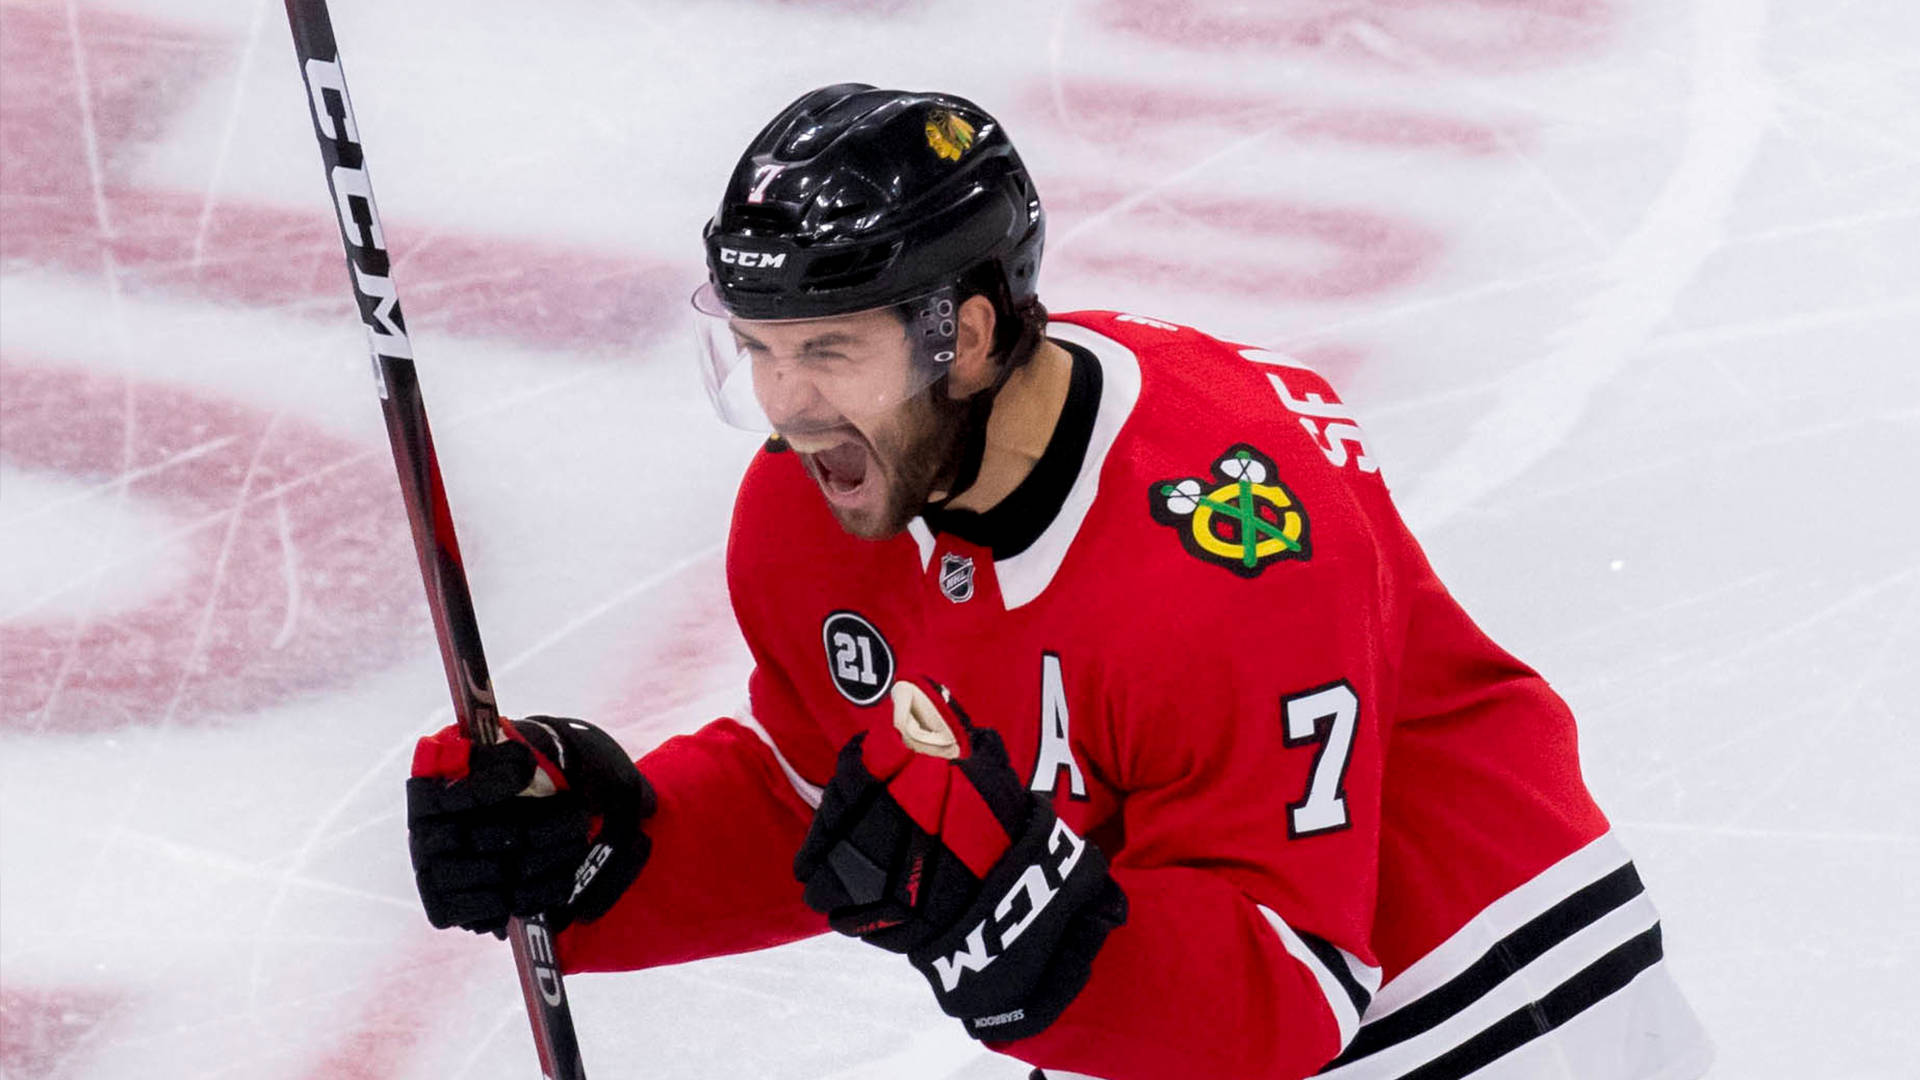 Brent Seabrook in action on the ice rink Wallpaper